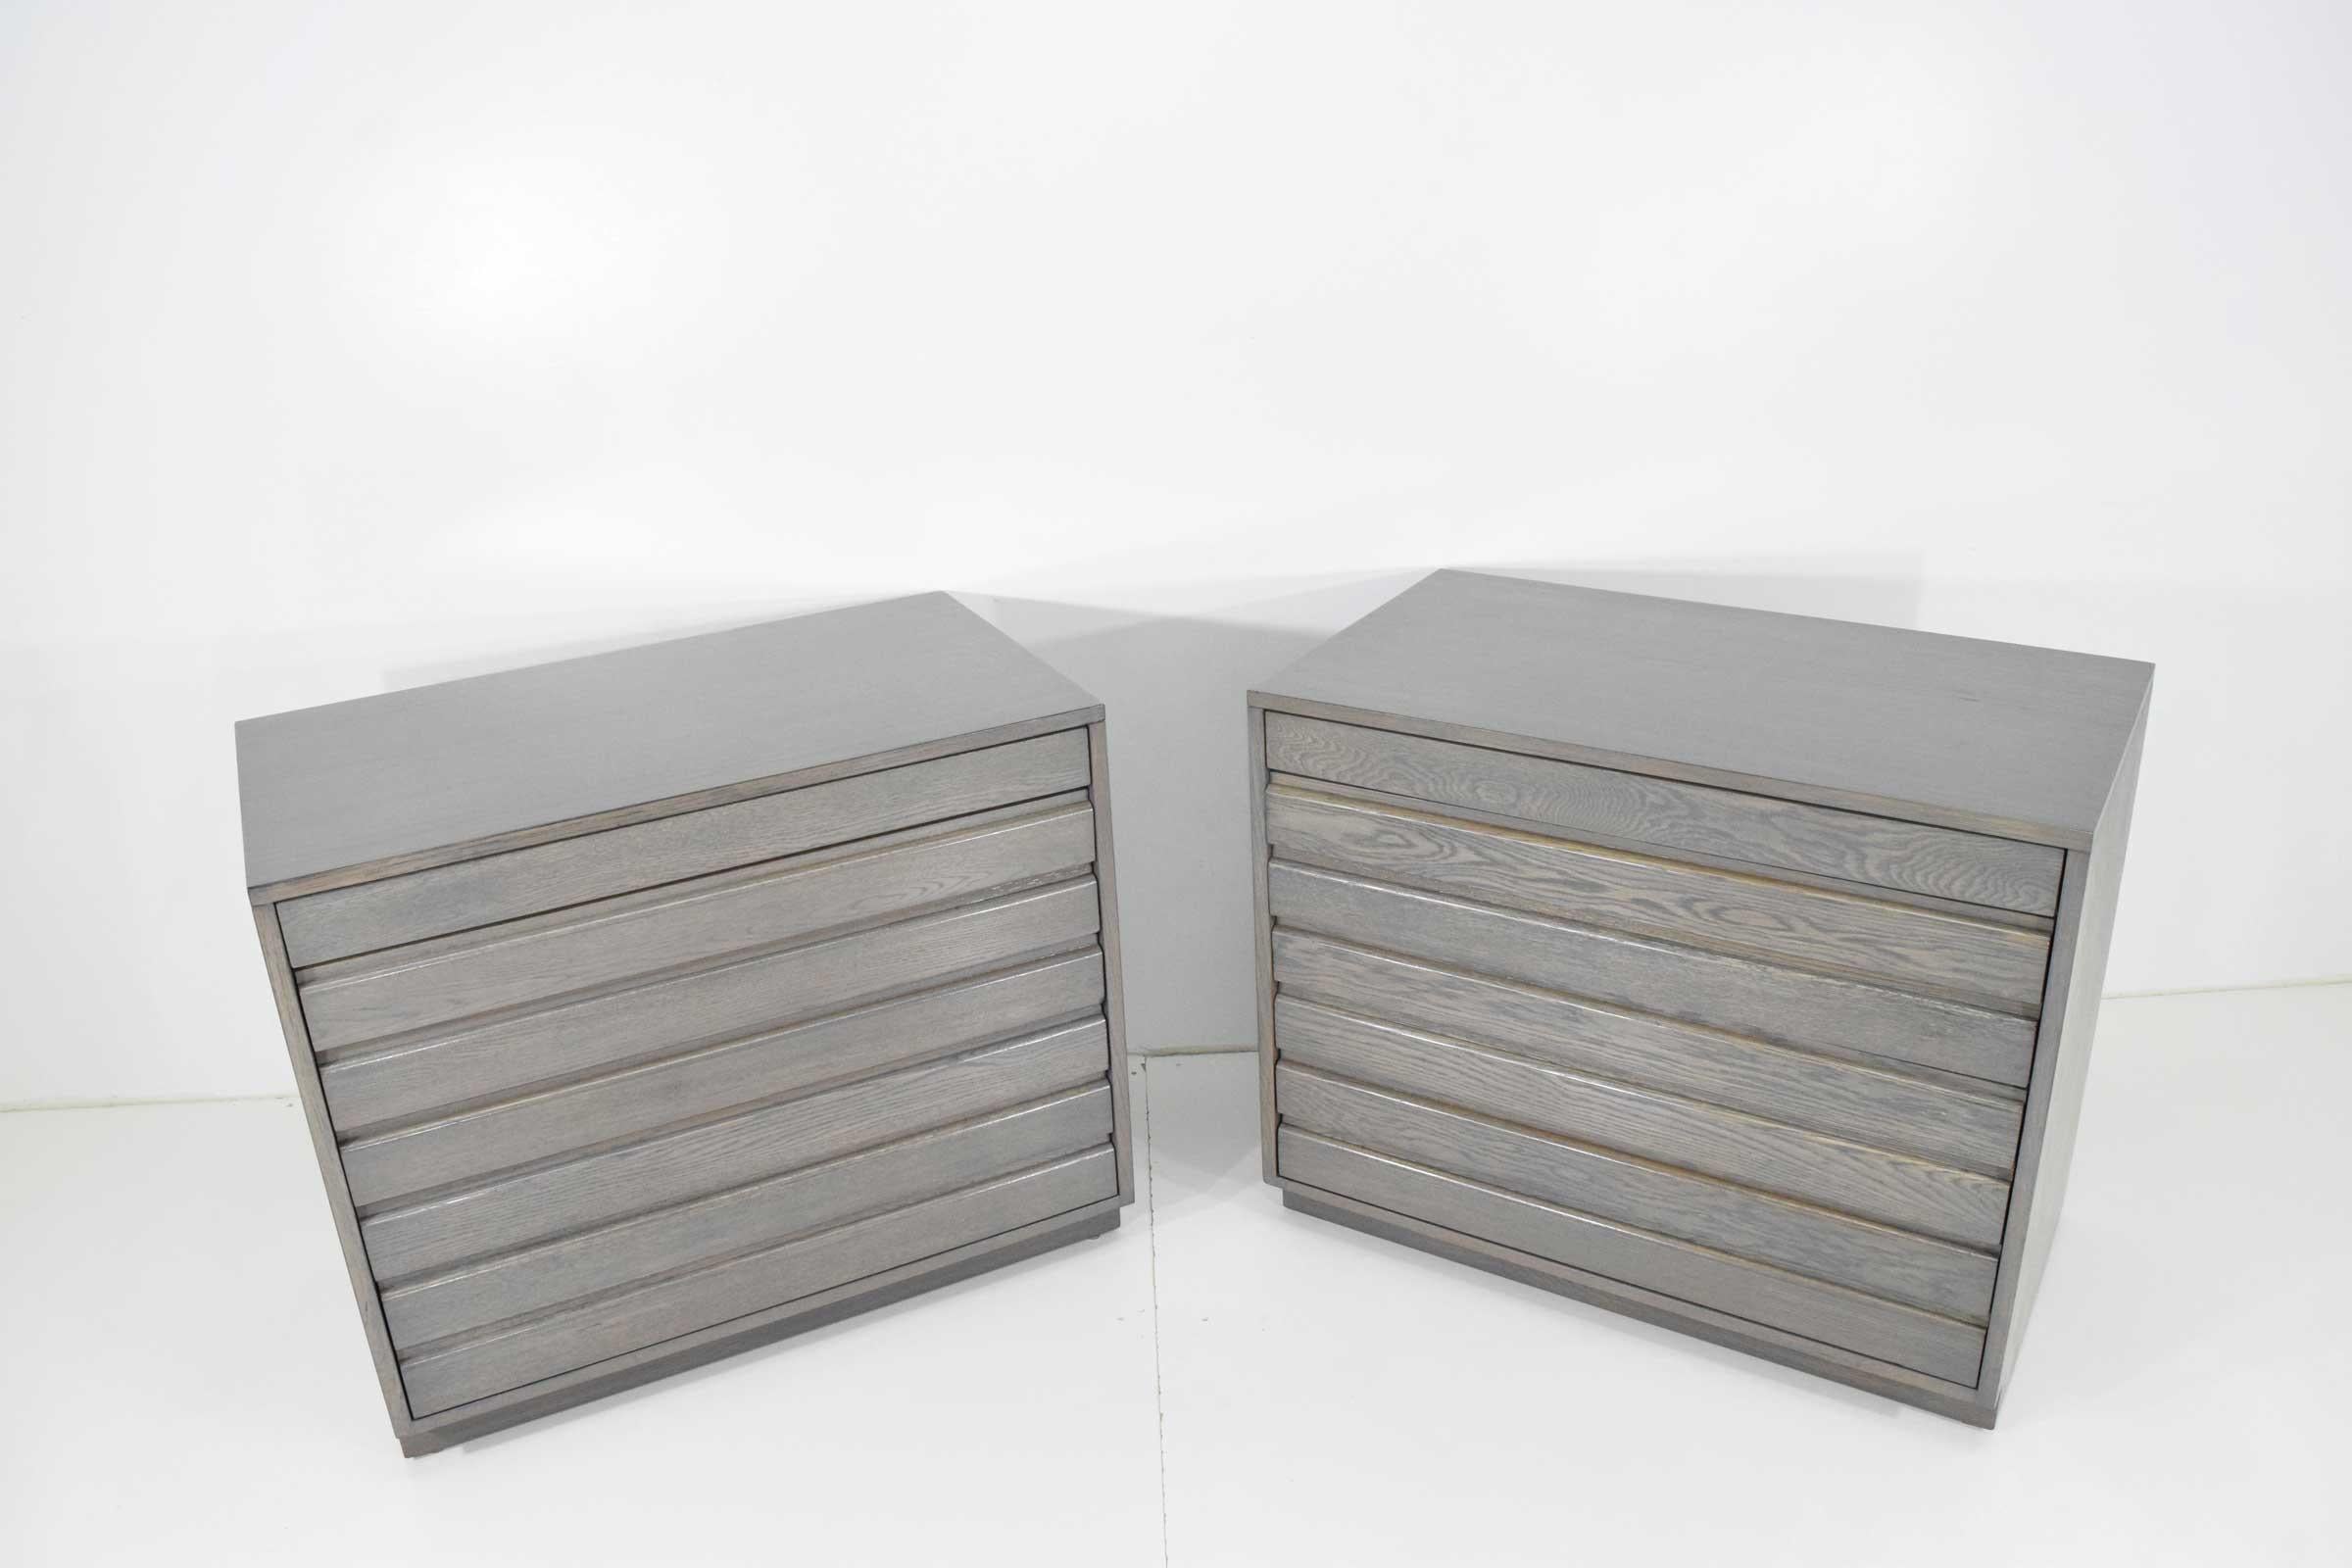 American Pair of Midcentury Chests Stained in Grey